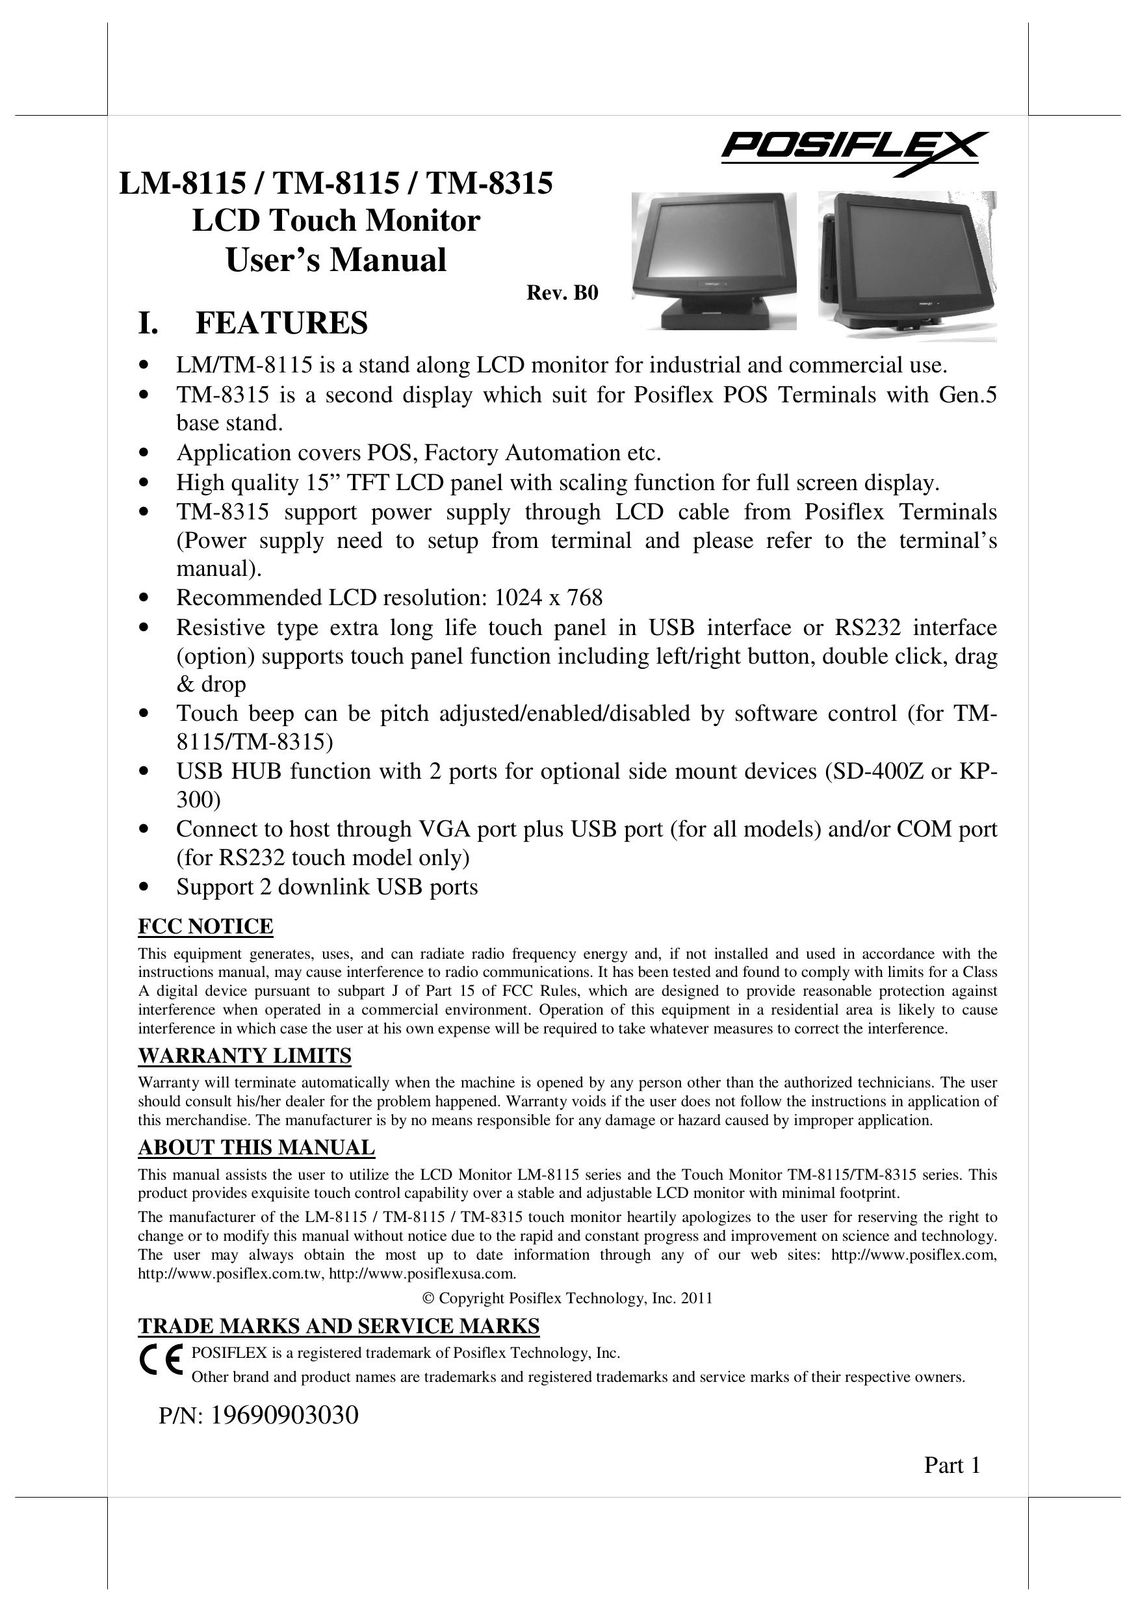 POSIFLEX Business Machines LM-8115 Computer Monitor User Manual